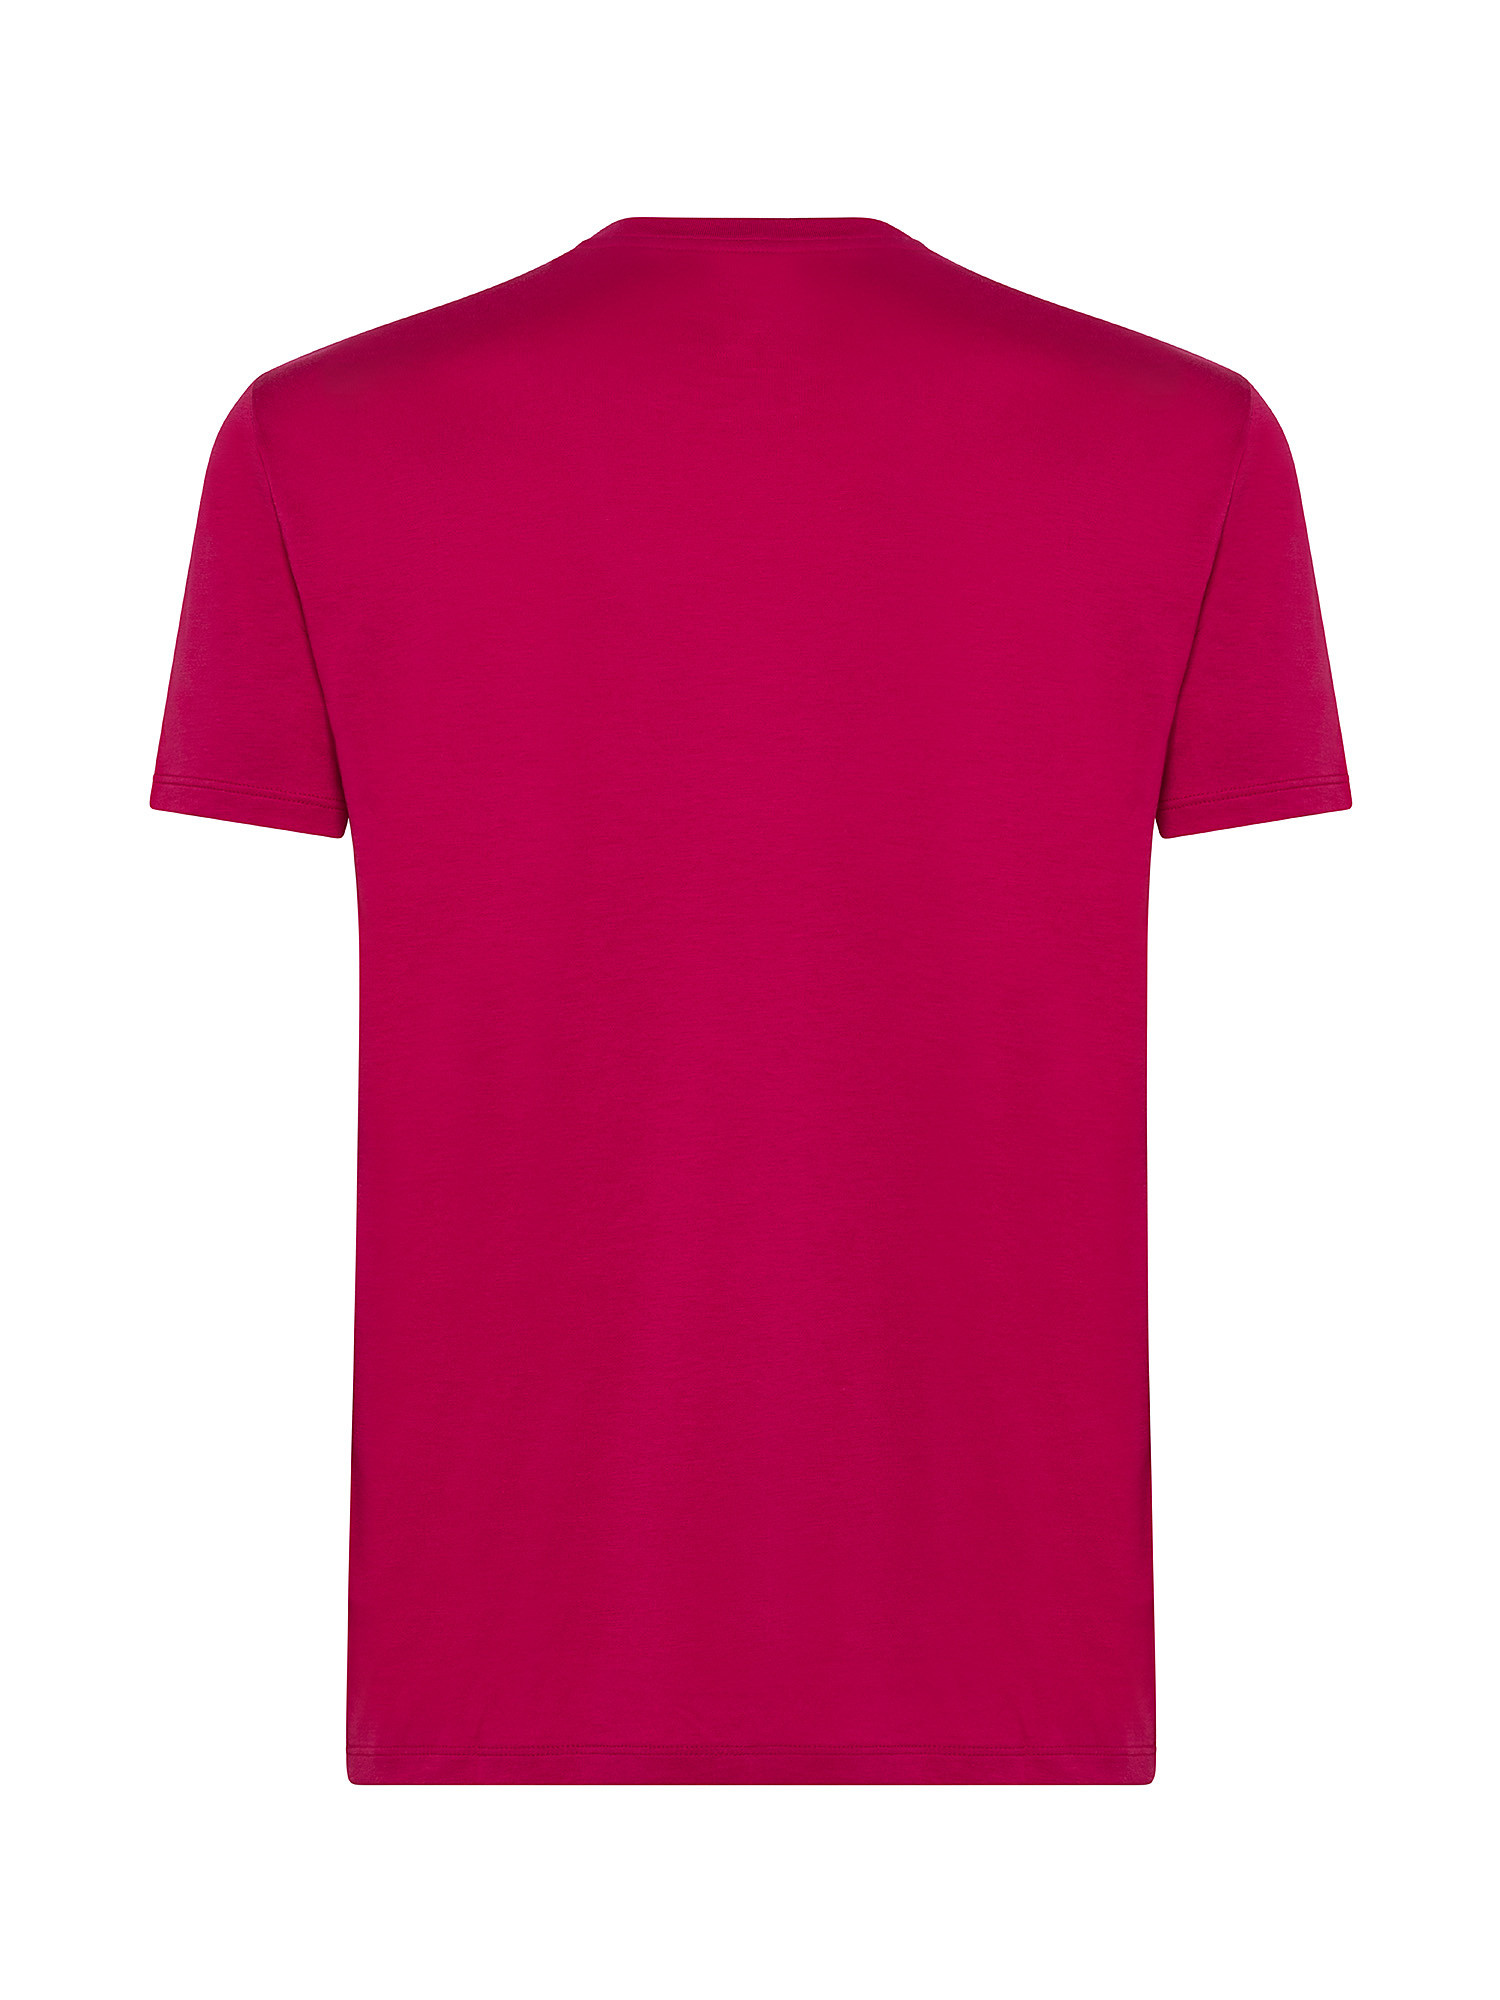 T-shirt, Rosa fuxia, large image number 1